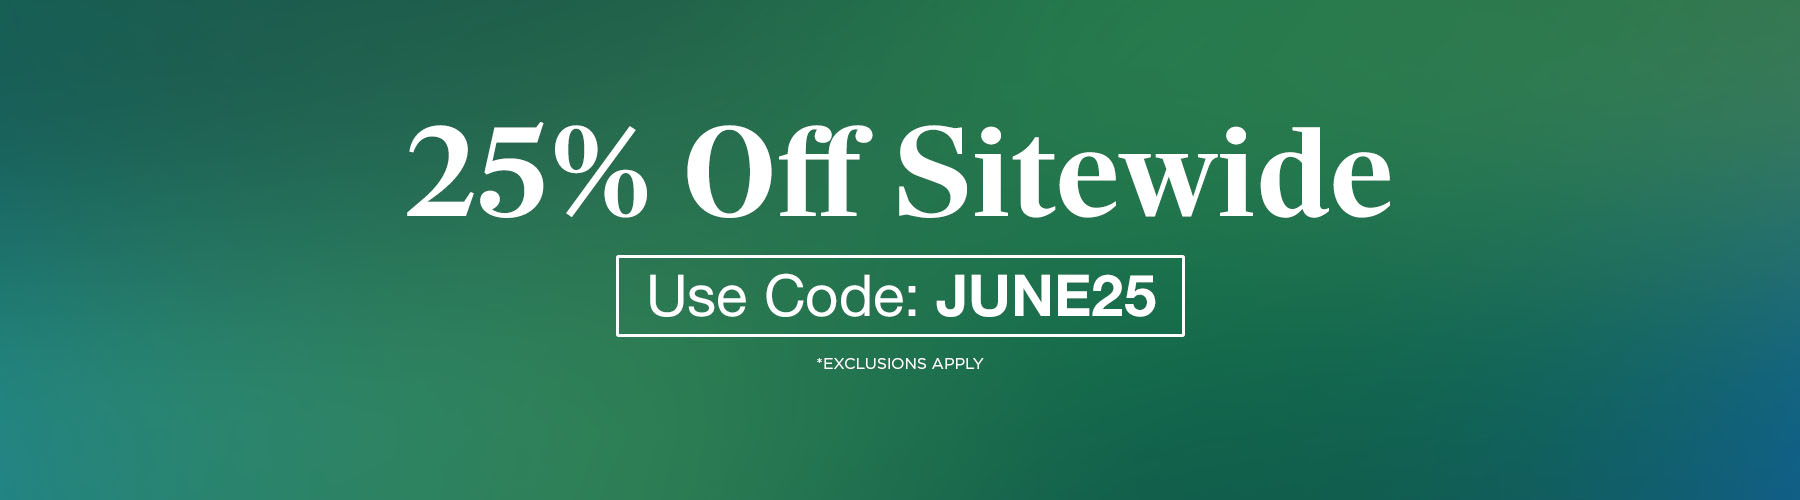 25% off sitewide with JUNE25! *exclusions apply*